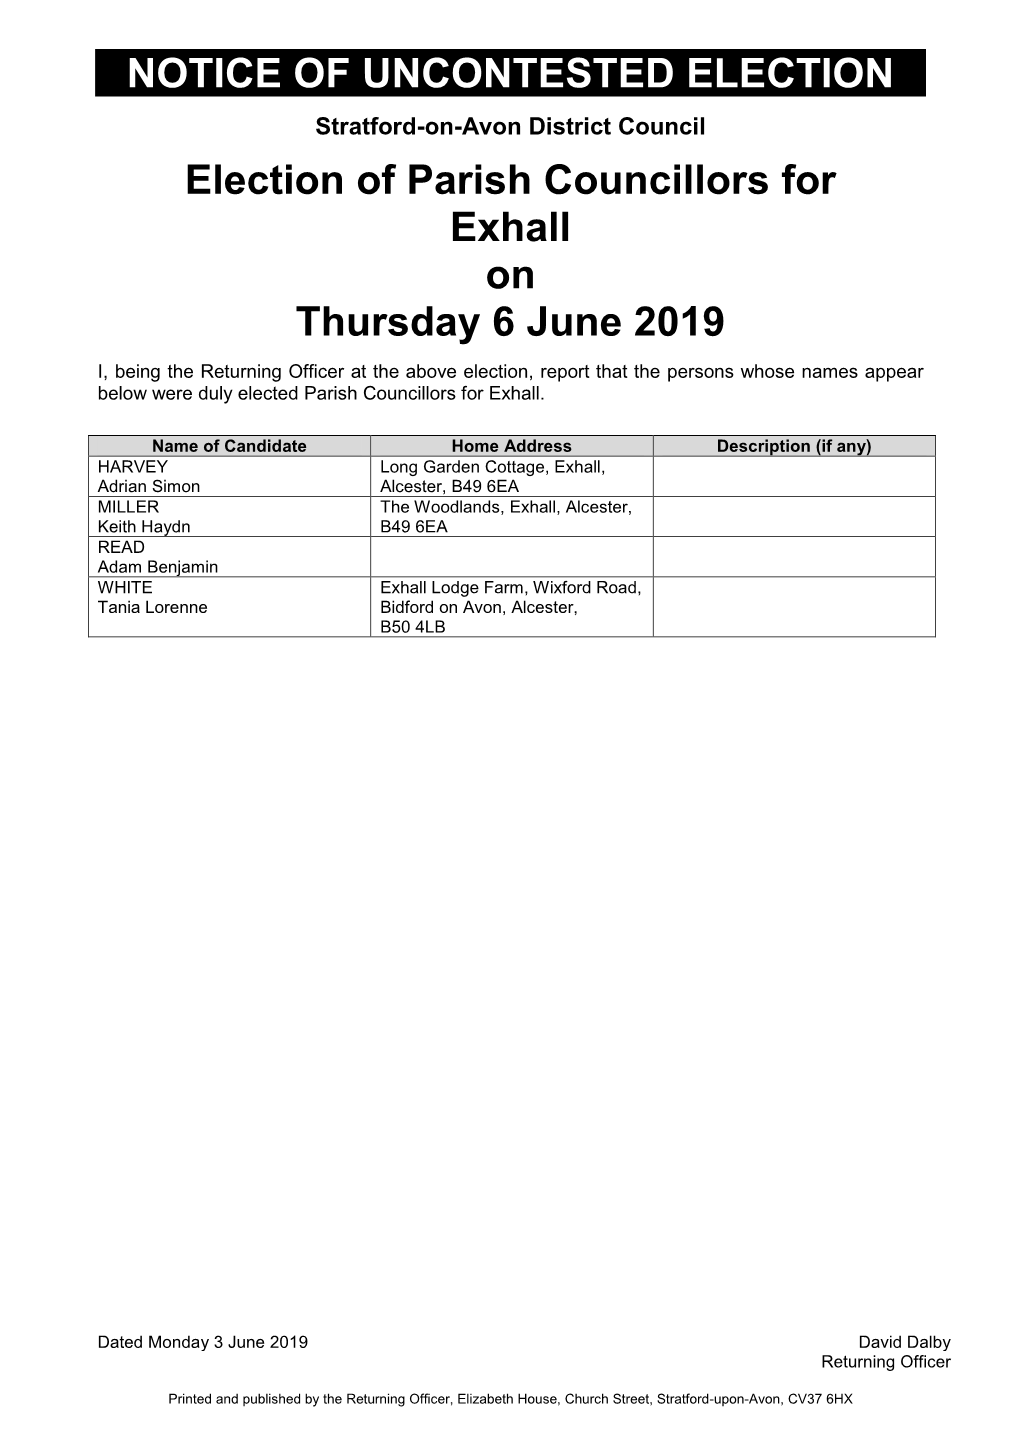 Notice of Uncontested Parish Elections 6 June 2019